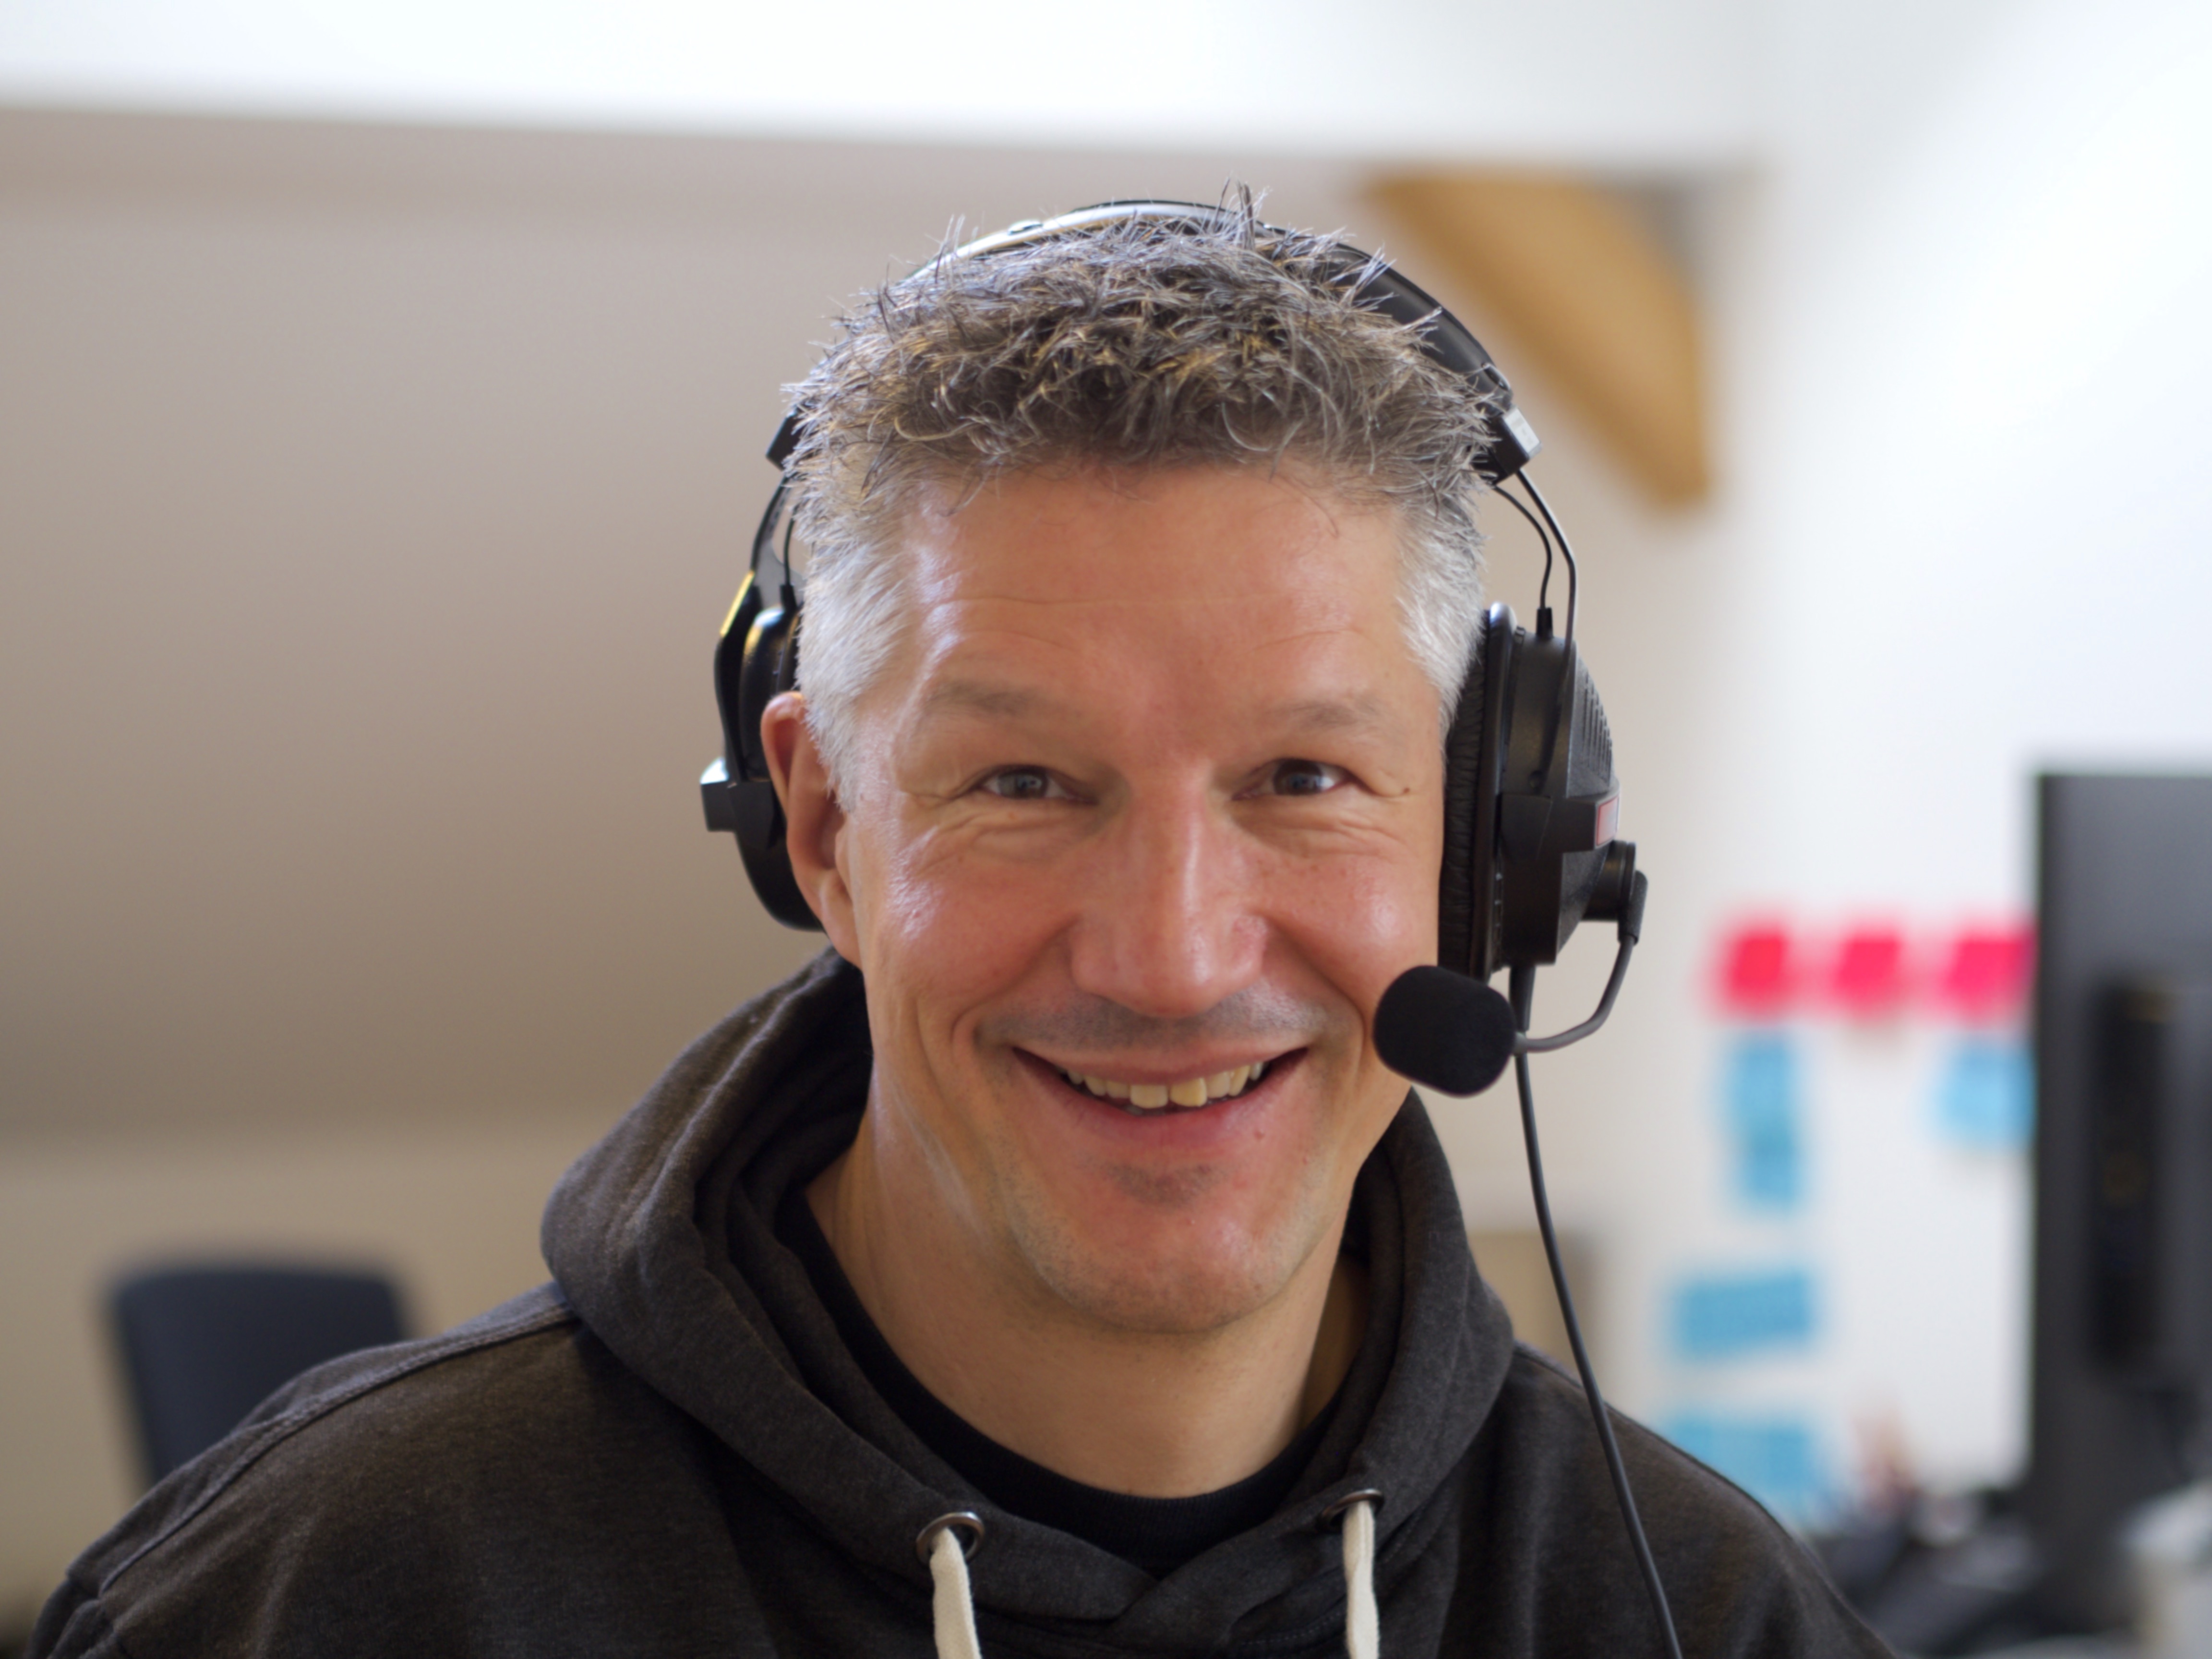 Photo of Ekke. He has short grey hair and is wearing a headset with a microphone and is smiling at the camera. He is wearing a black hoodie with white strings and is photographed in an office environment.